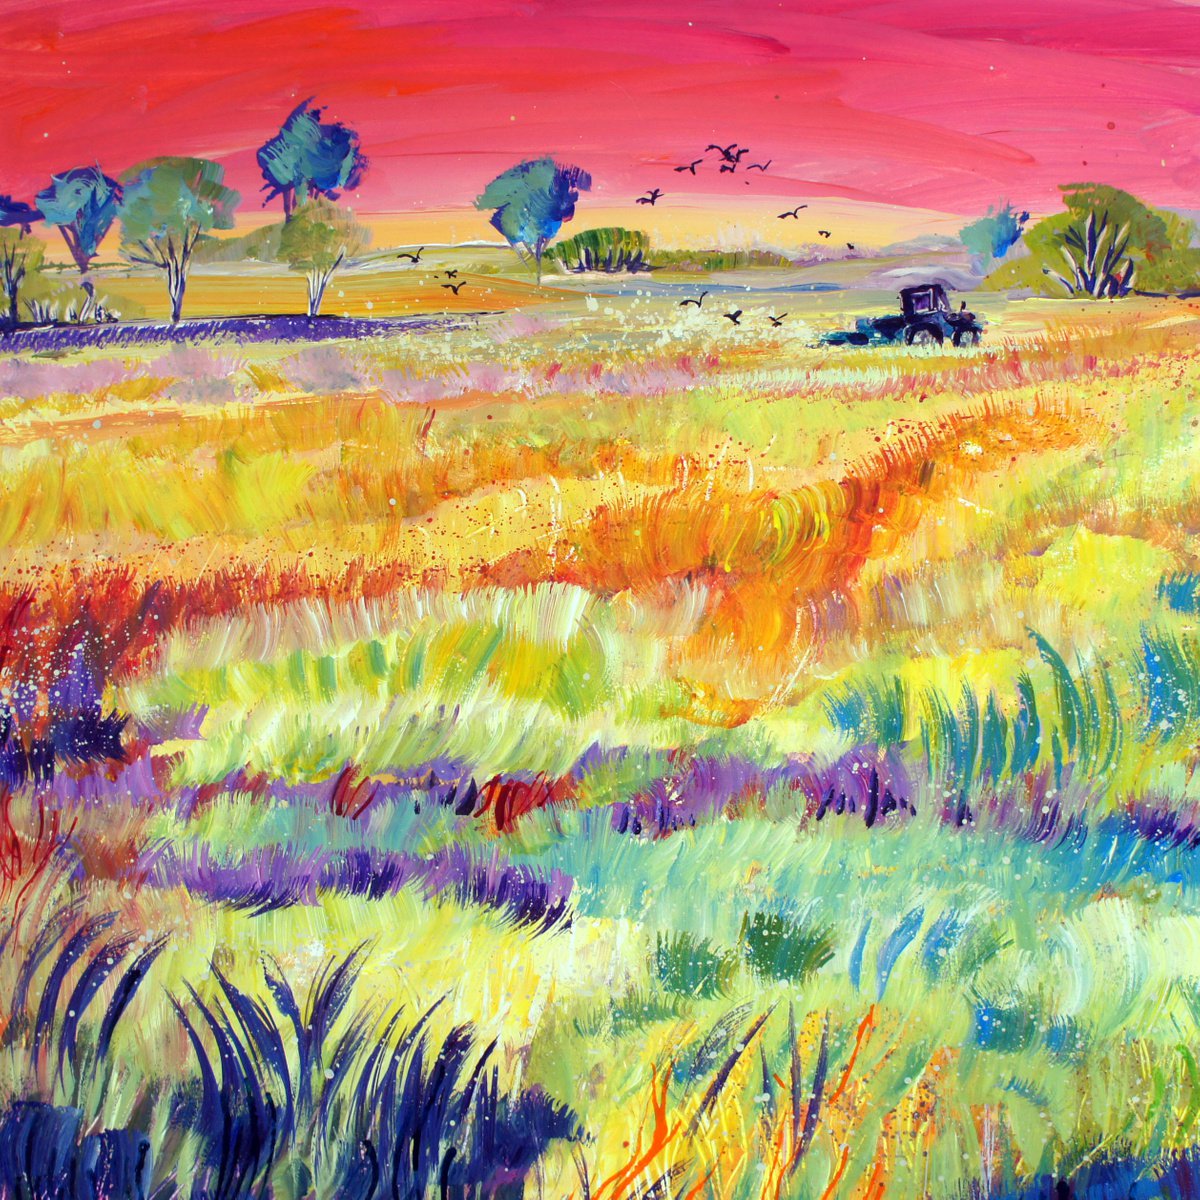 Make Hay while the Sun Shines by Julia Rigby